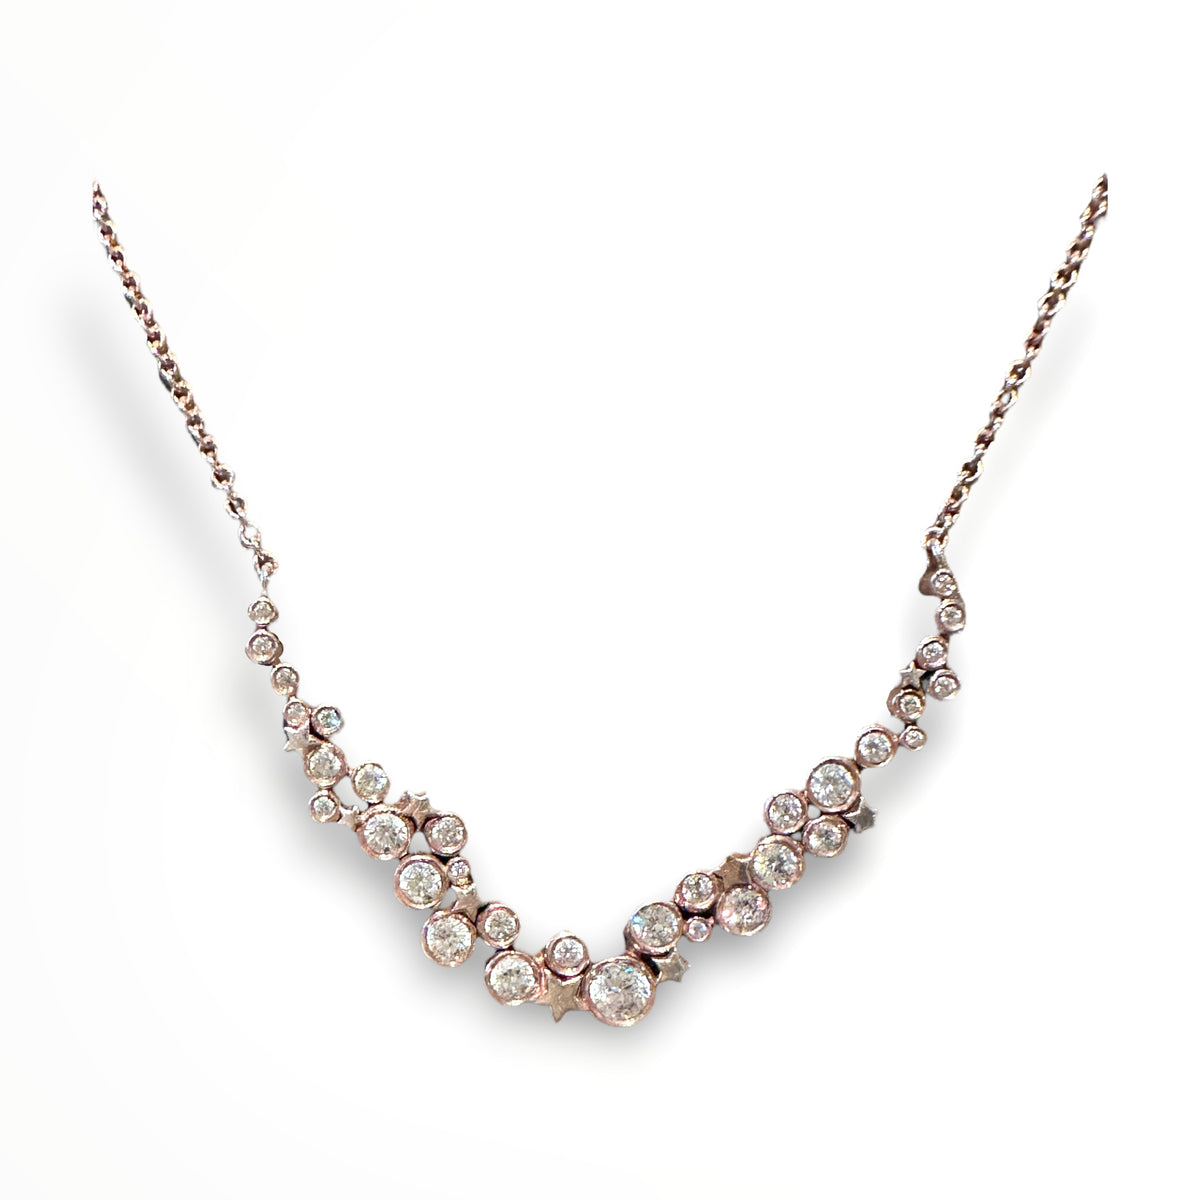 Astra Diamond Constellation Necklace in 18K Gold